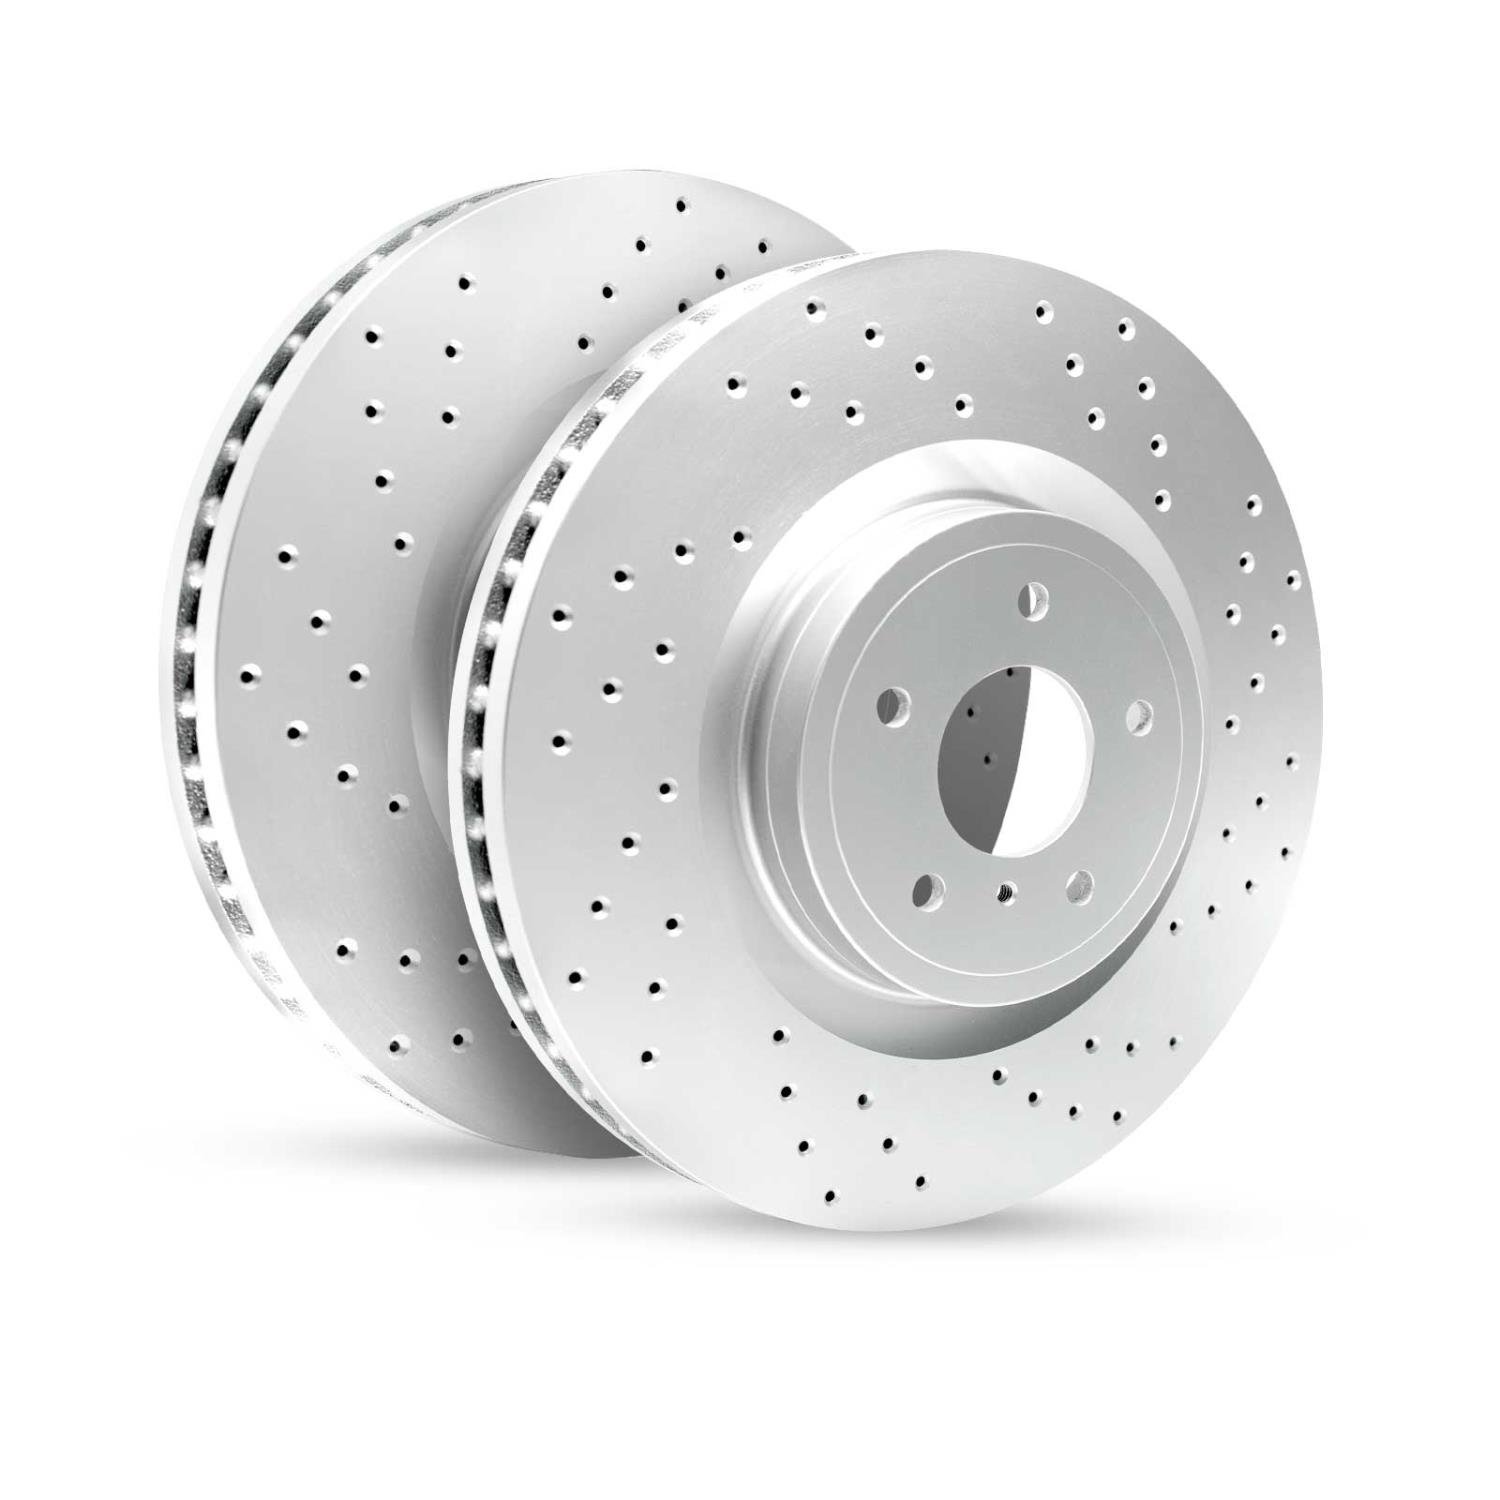 GEO-Carbon Drilled/Slotted Rotors, 1997-2015 Acura/Honda, Position: Rear